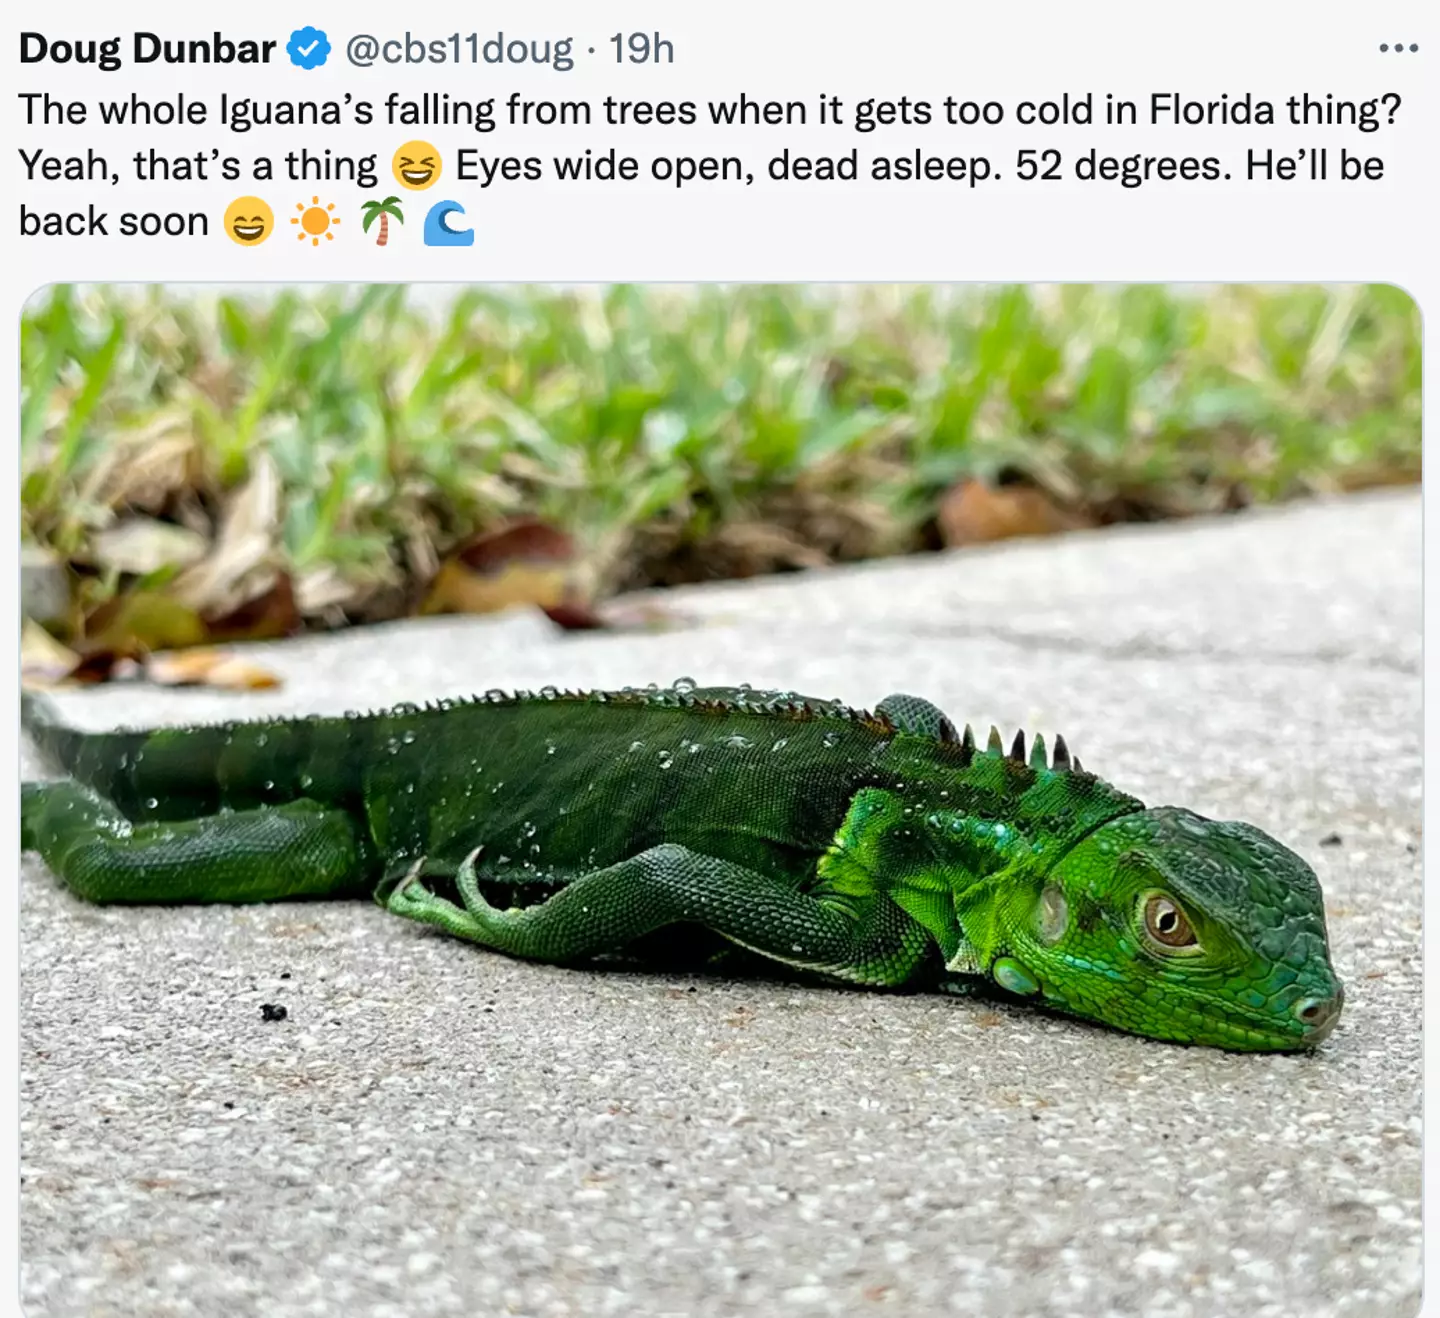 Officials have made clear the iguanas are not dead.